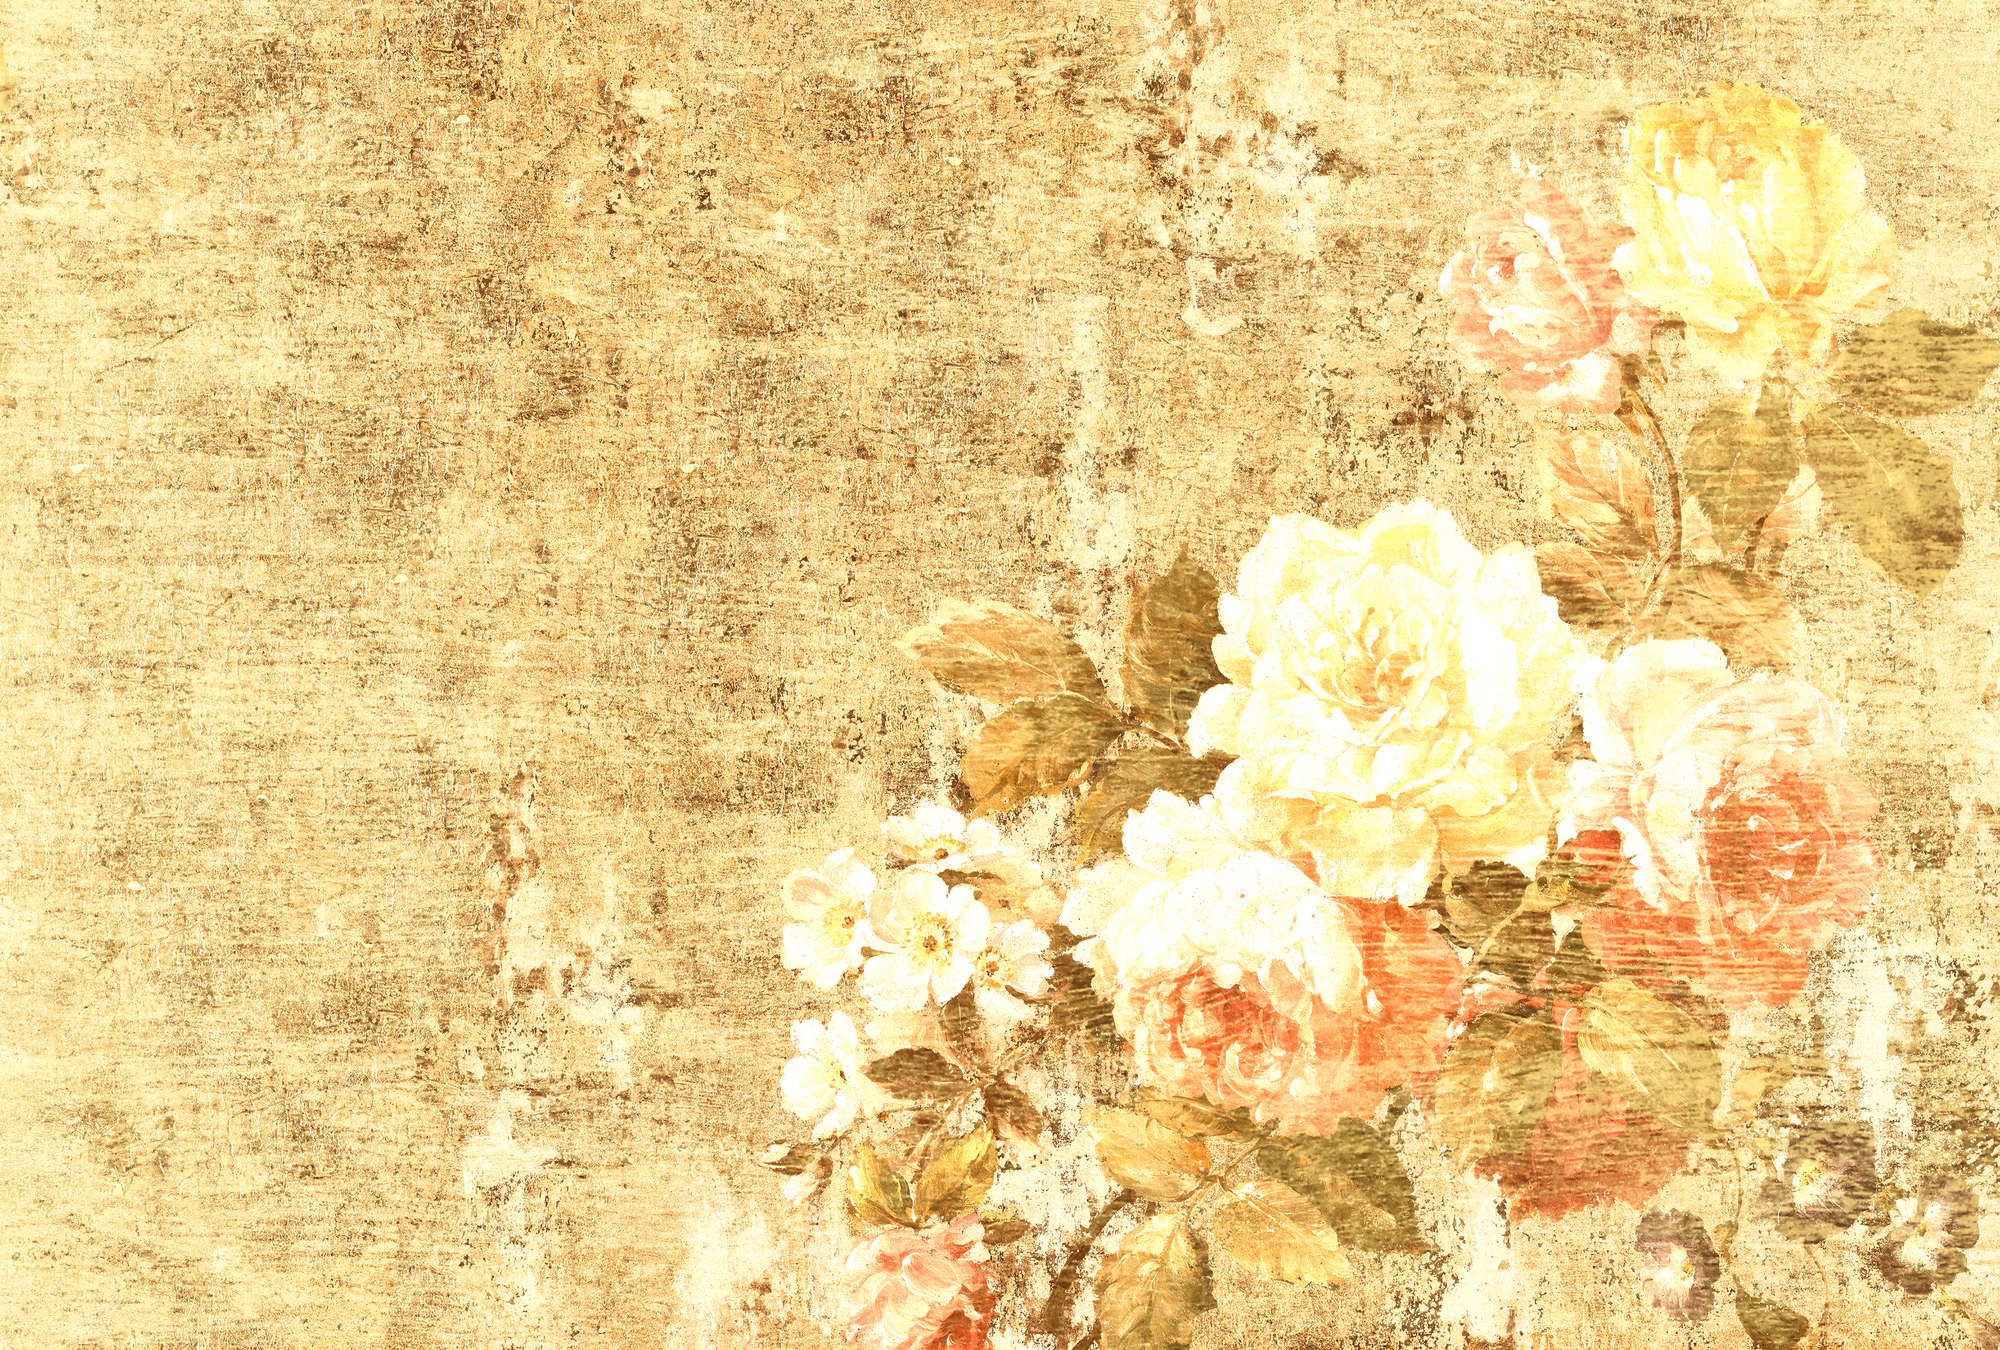             Photo wallpaper floral ornament with roses, rustic look - yellow, pink, cream
        